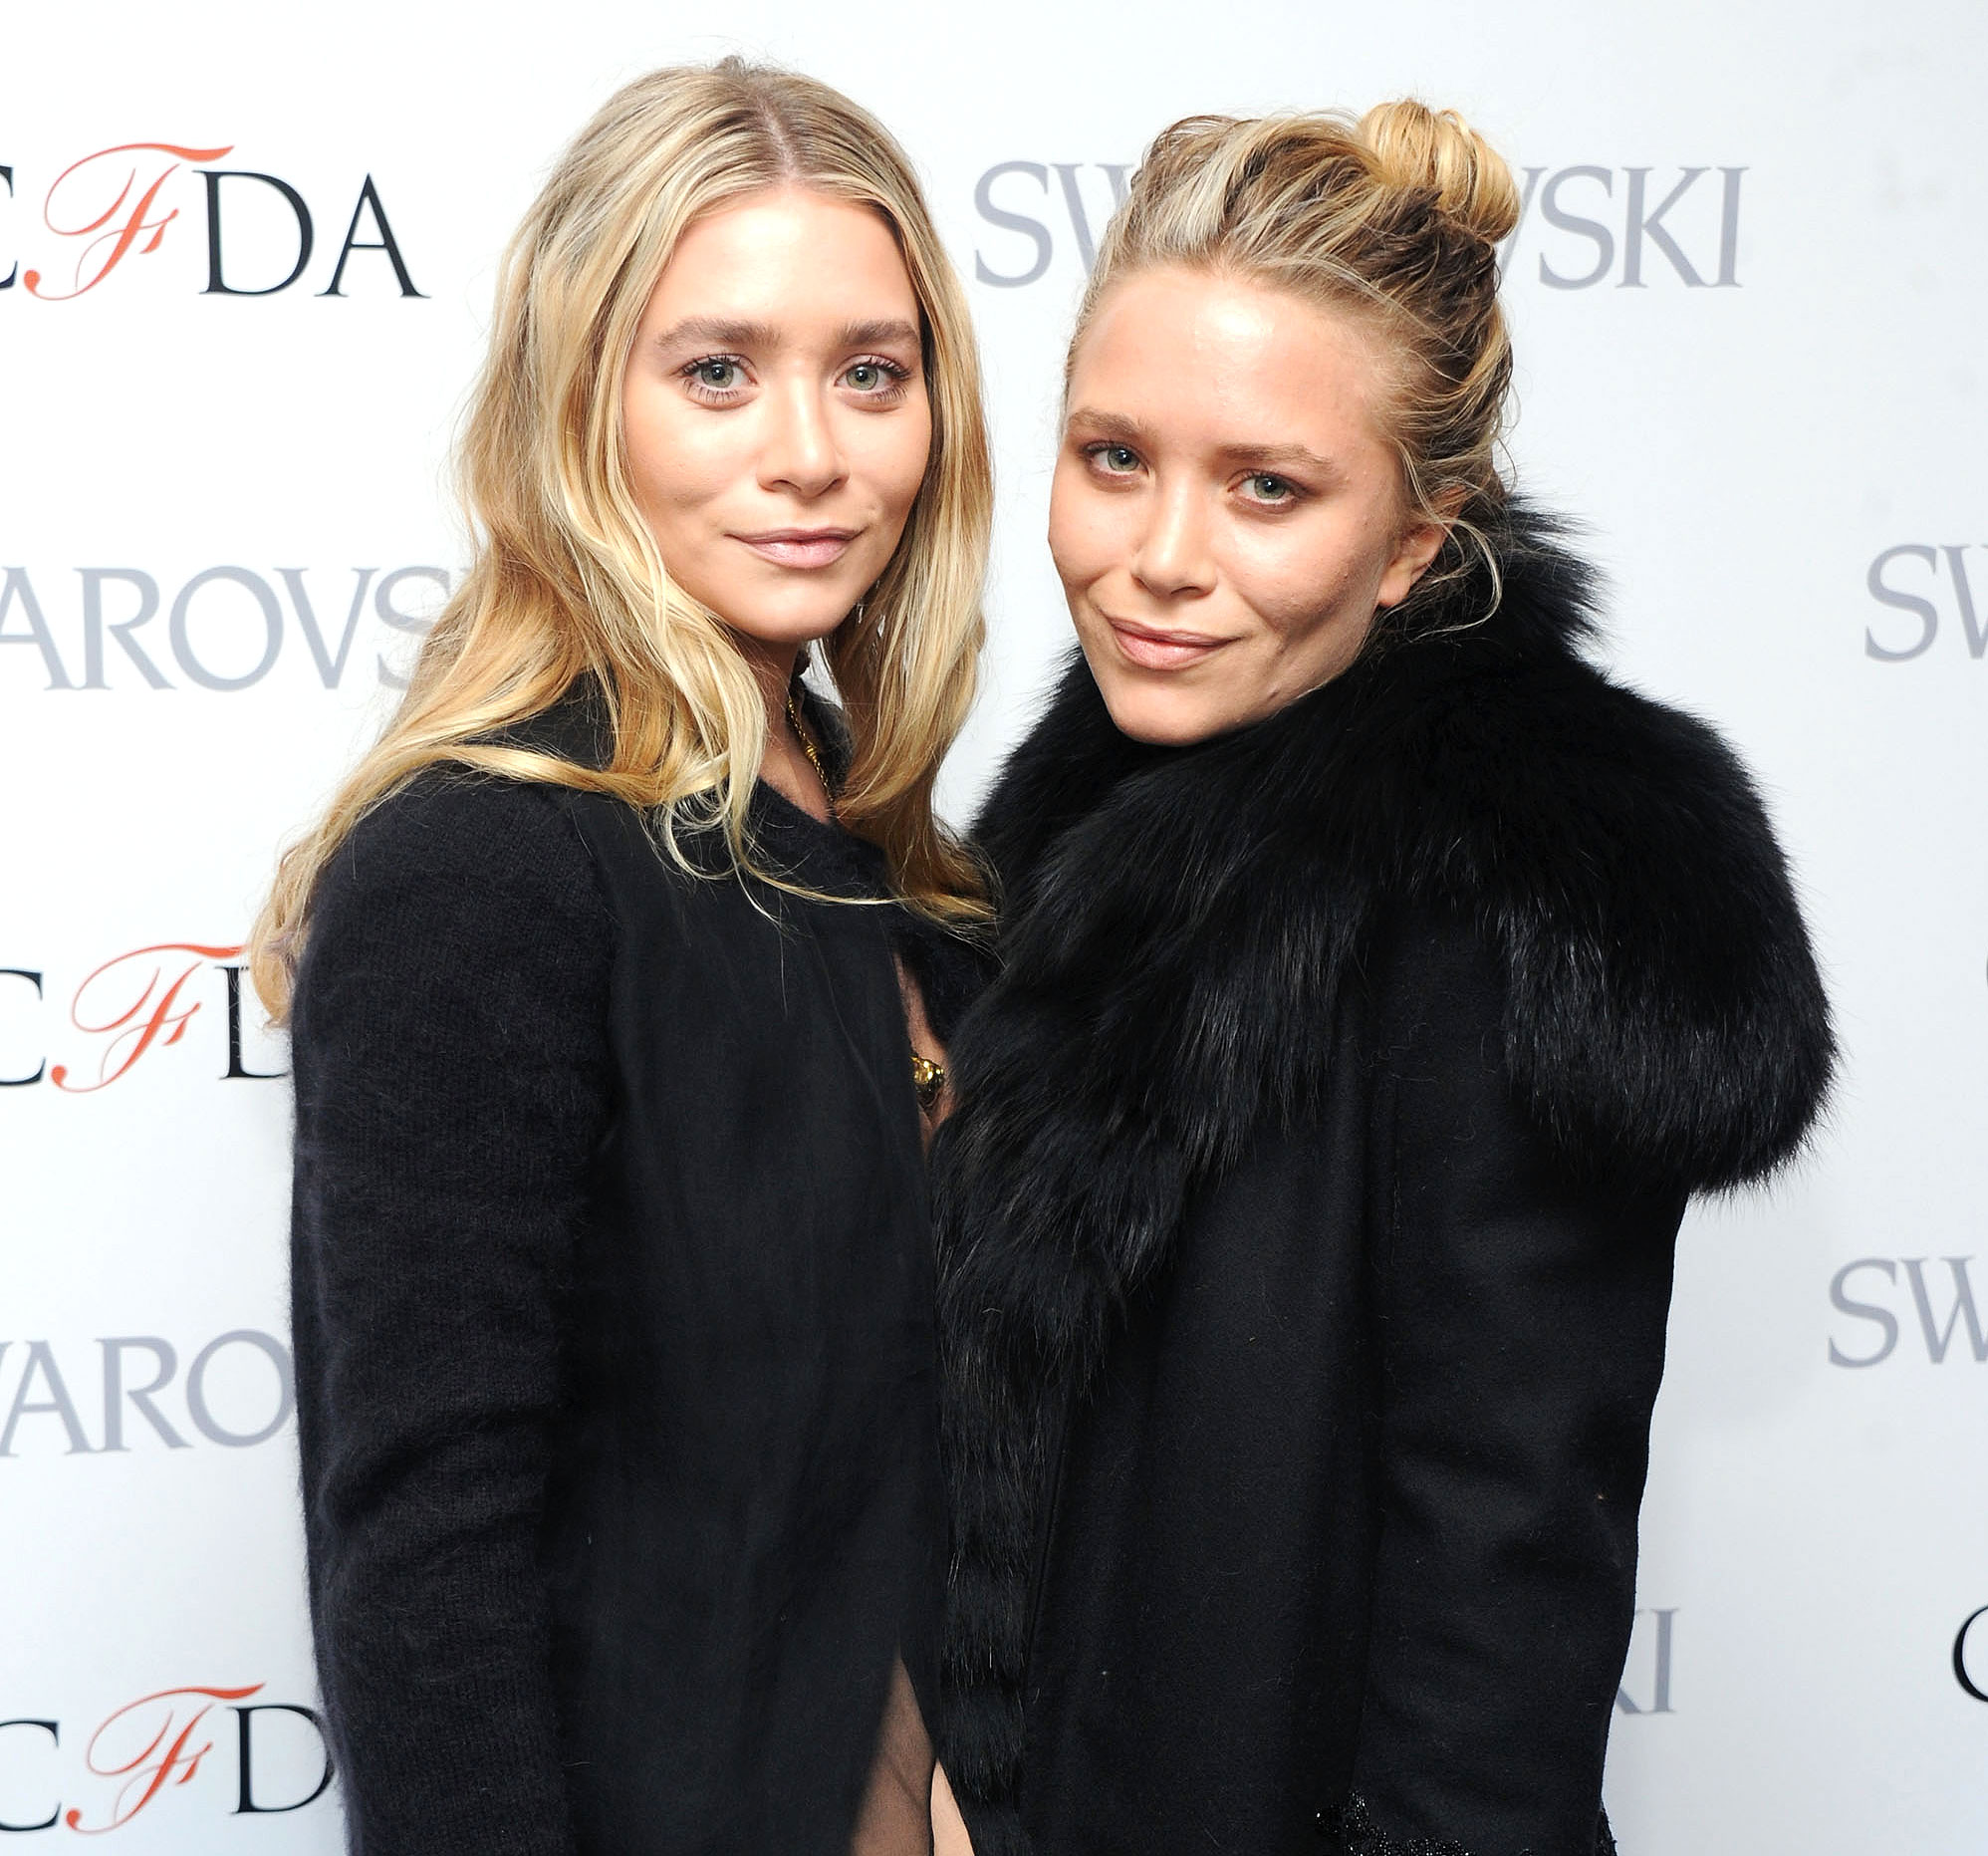 Olsen twins' New York show confirms rise to fashion royalty